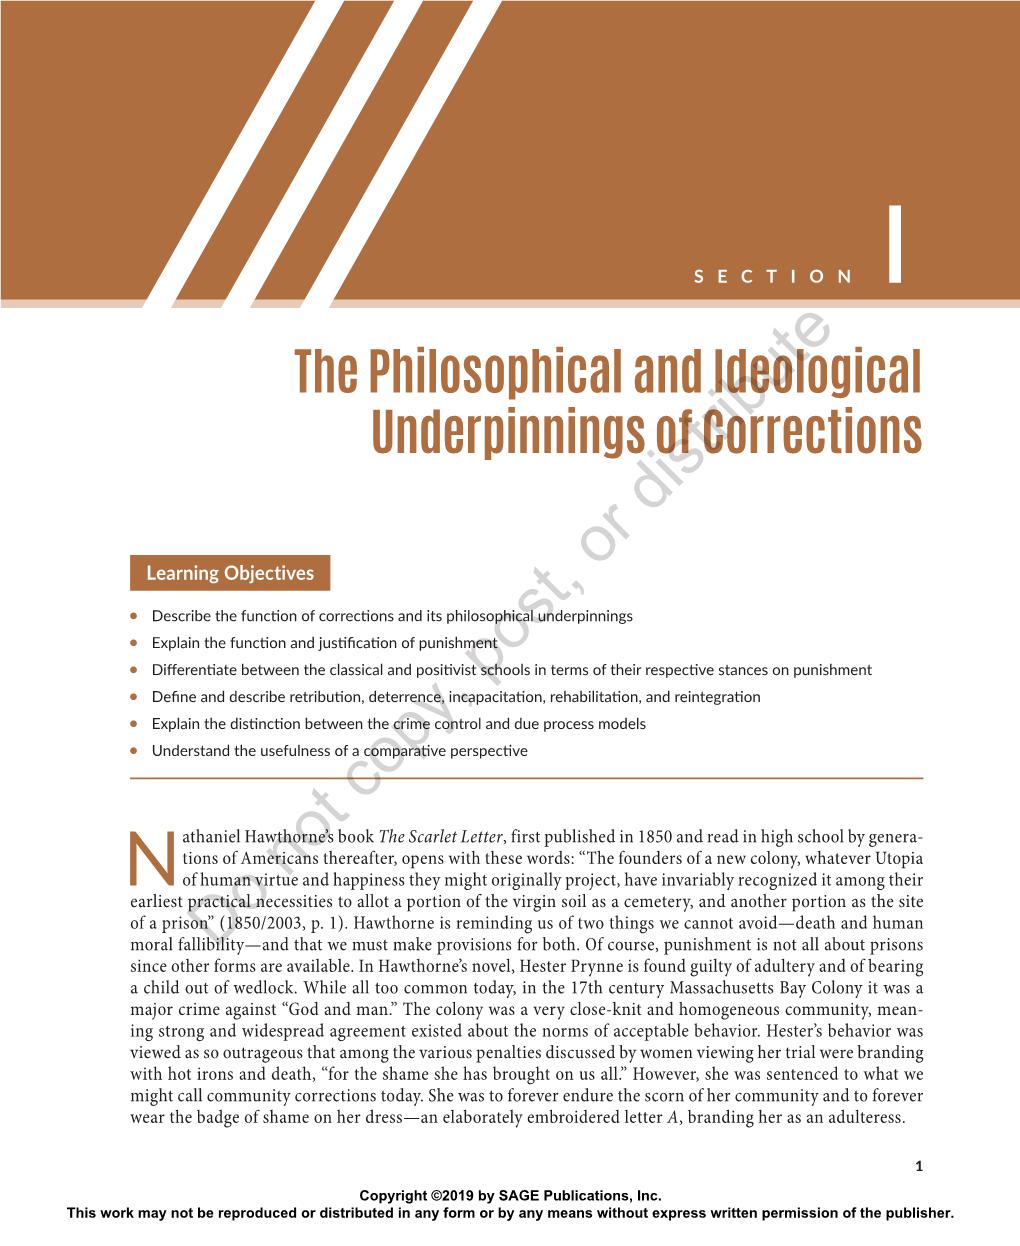 The Philosophical and Ideological Underpinnings of Corrections